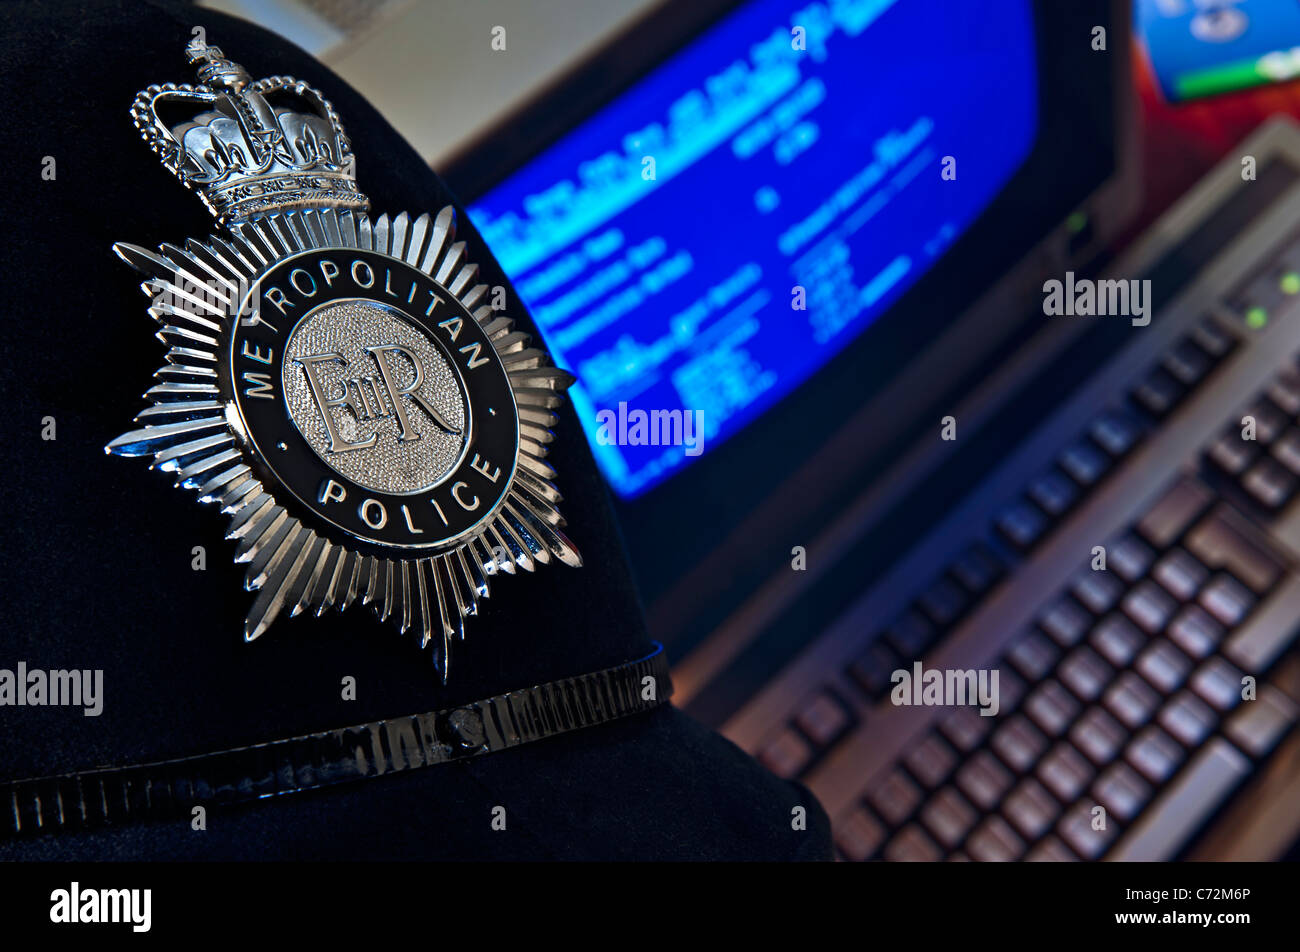 Concept Metropolitan police helmet and badge with computer screen in background Stock Photo